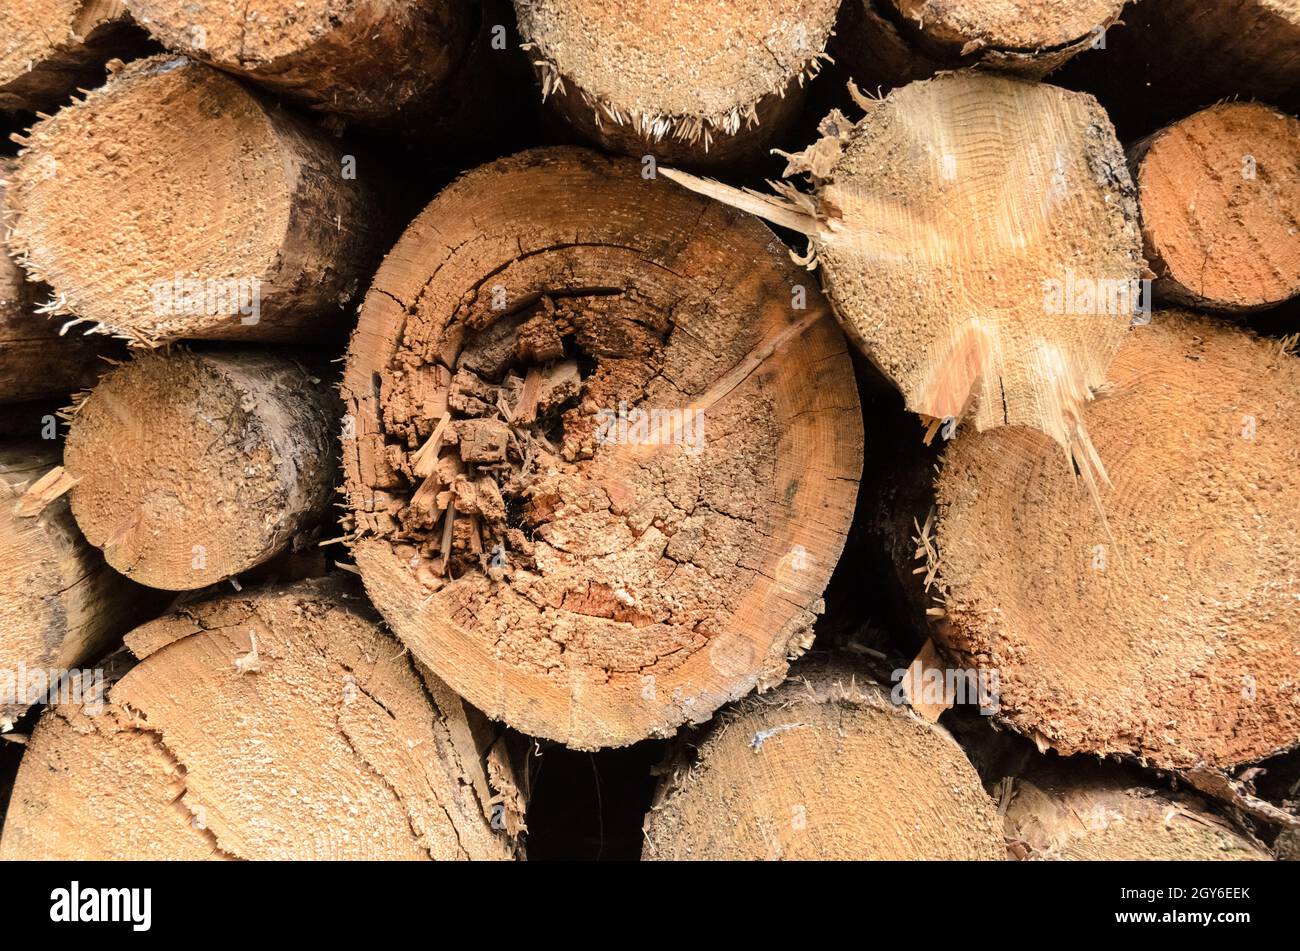 Felled trees at a lumberyard or logging site, front view cross-section of growth rings, log pile or trunks, deforestation in Germany Stock Photo